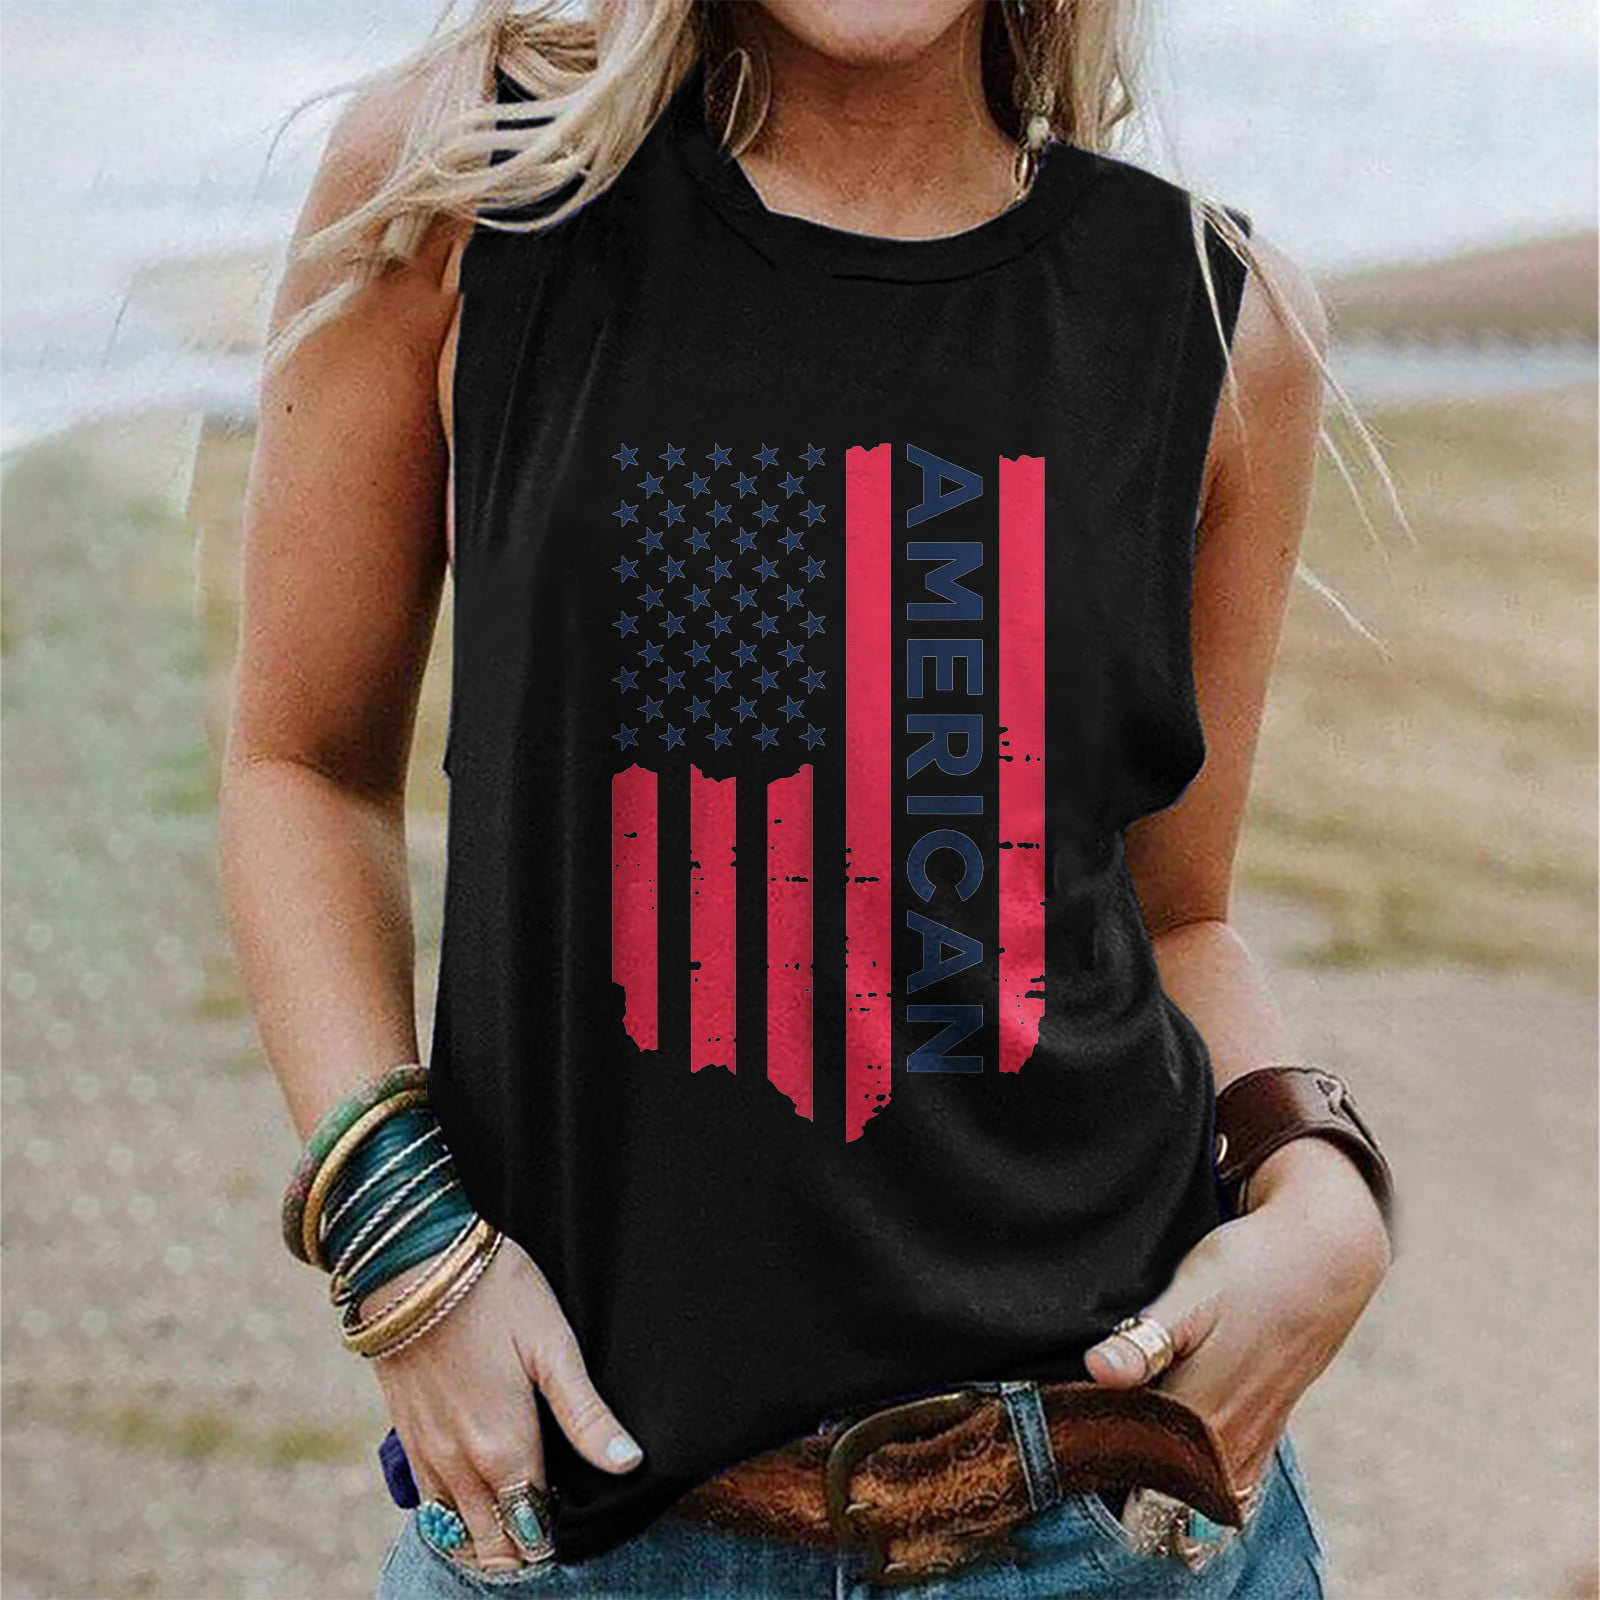 2021 USA Flag Tank Tops for Women 4th of July Tank Tops Shirts Loose Sleeveless Stars Stripes Patriotic Tee Camisole 